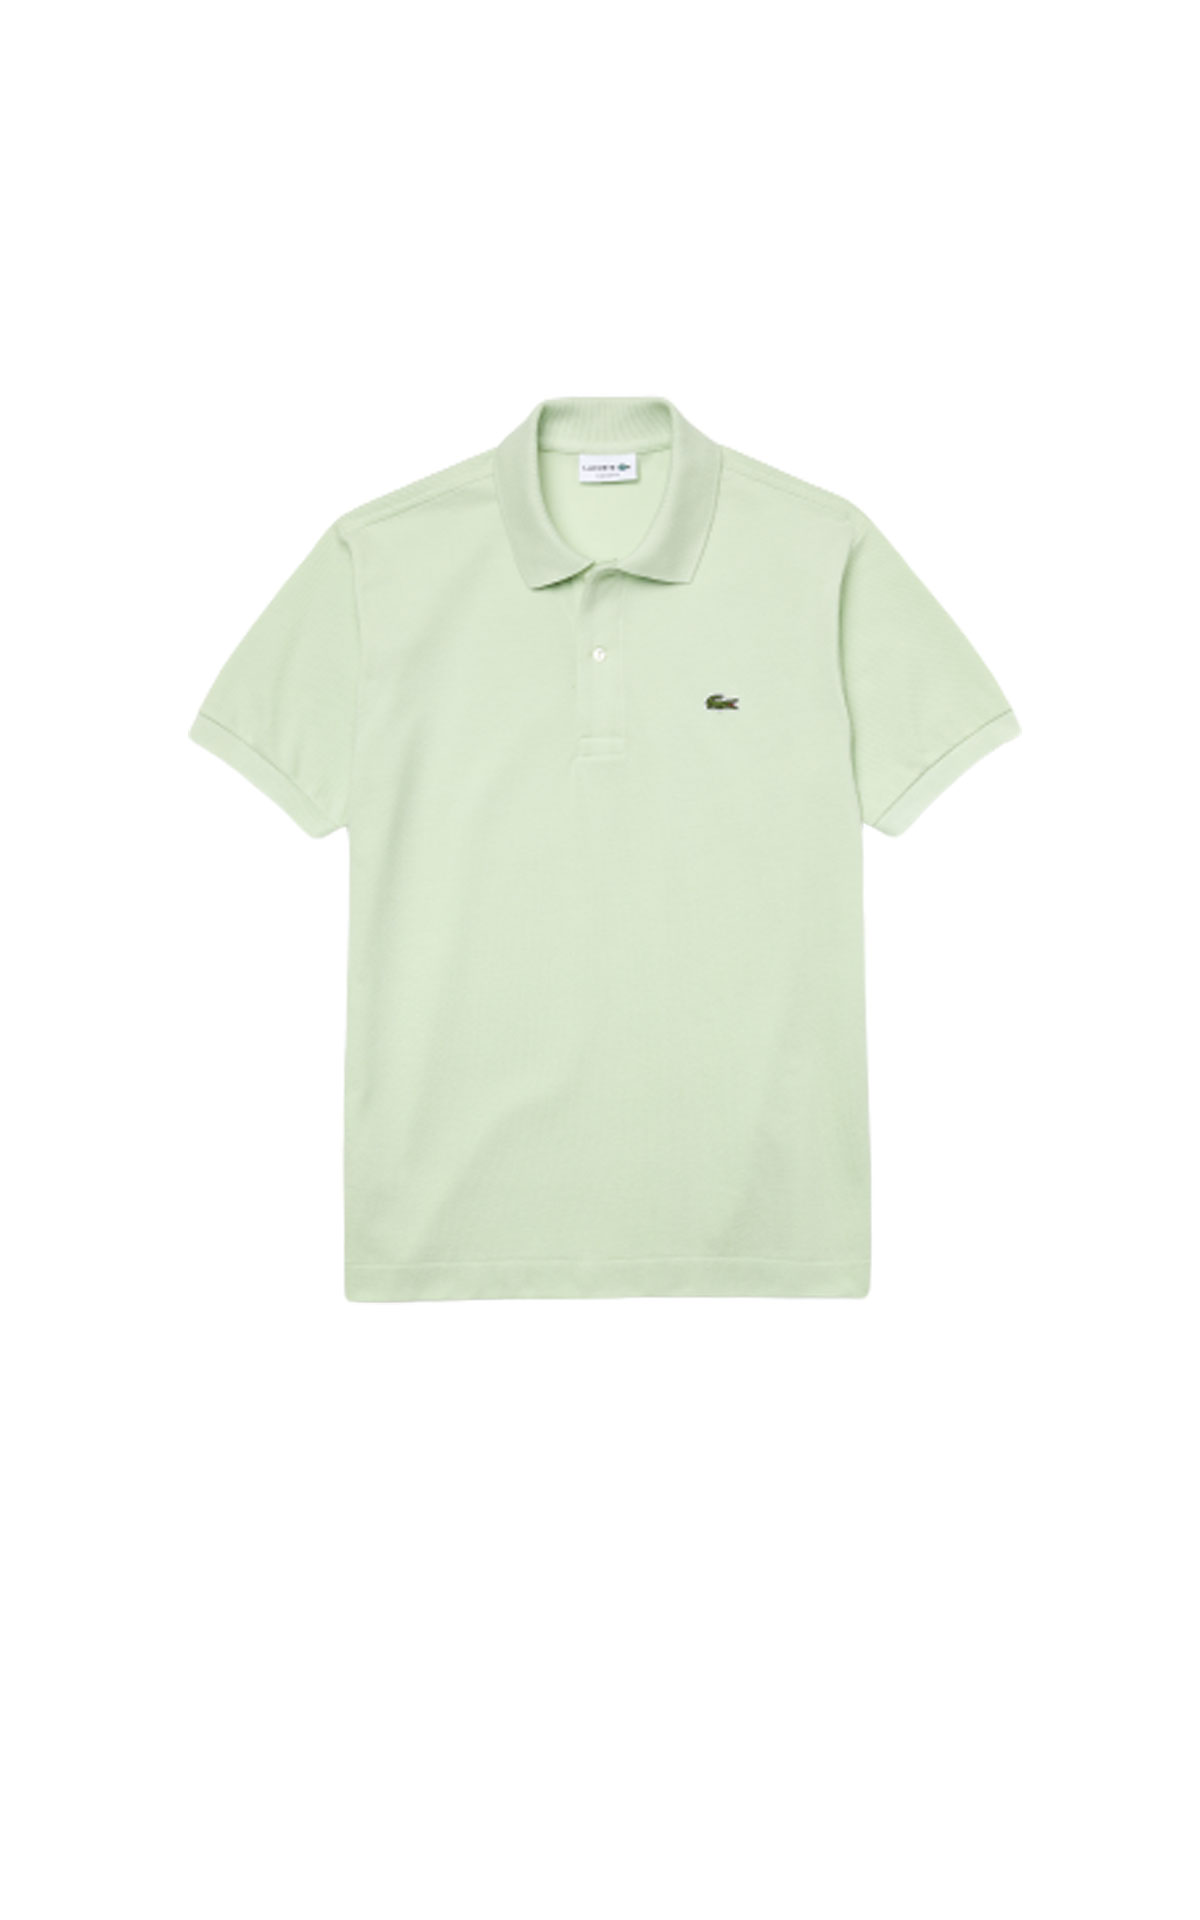 Lacoste Classic fit polo shirt from Bicester Village